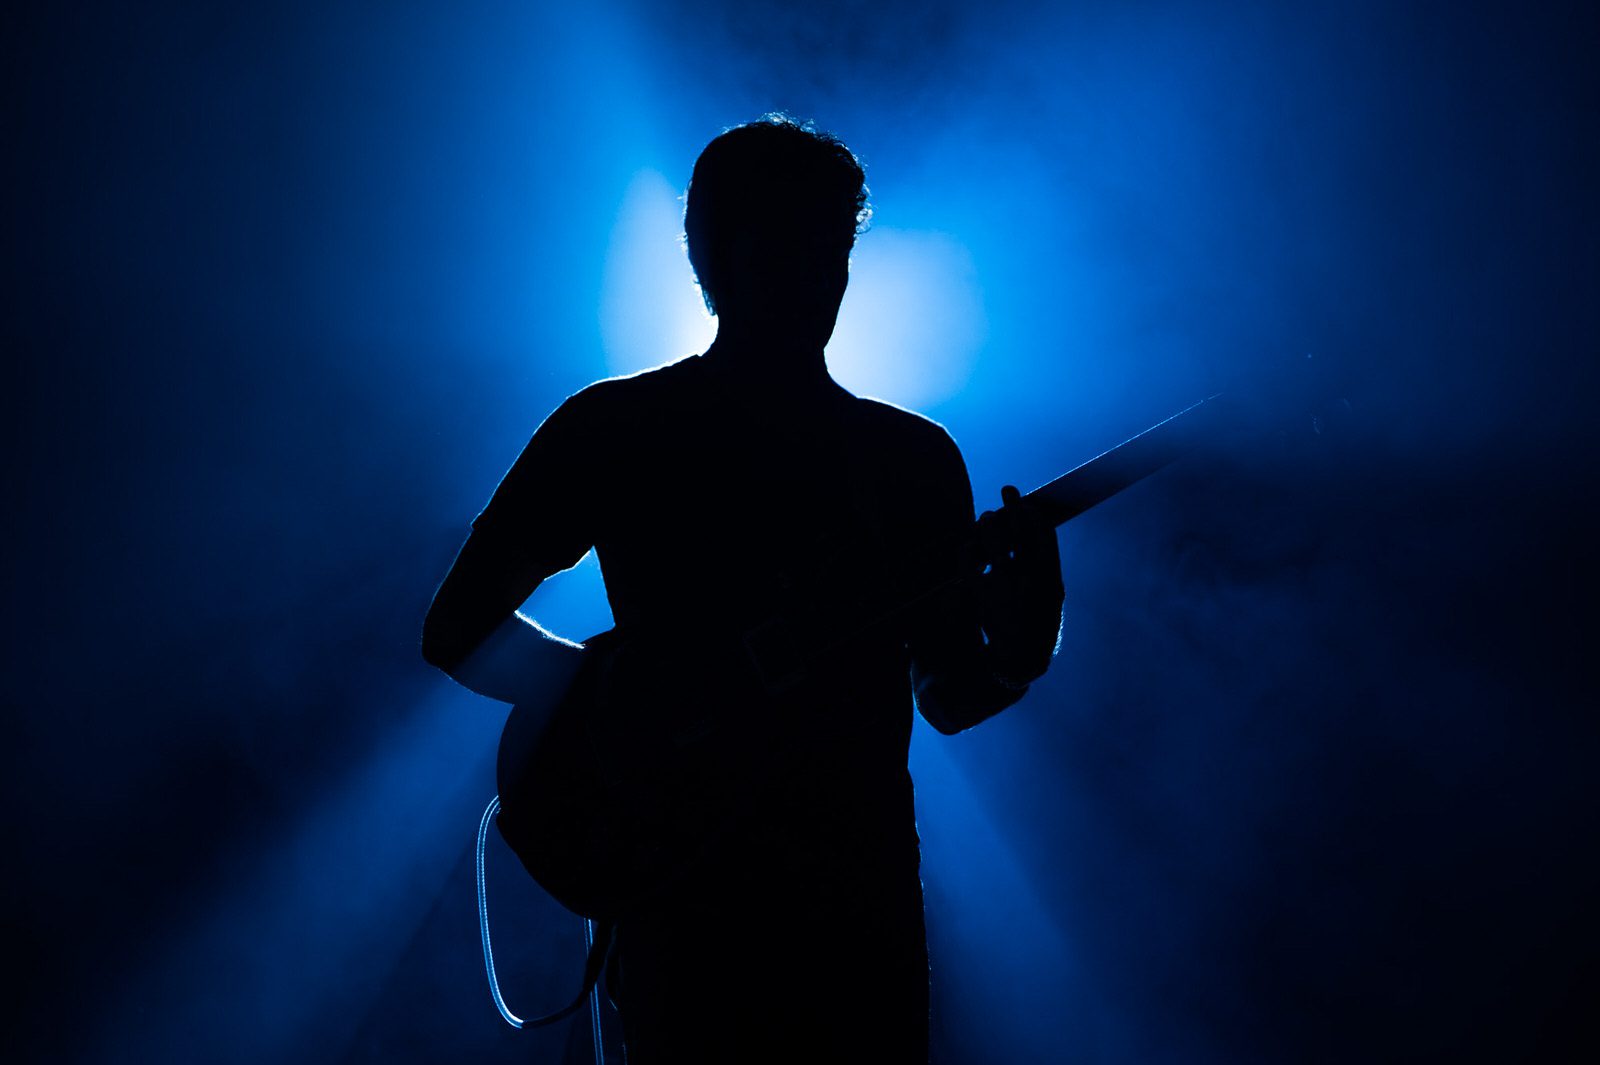 Guitarist Mark Lettieri in silhouette during a Snarky Puppy concert